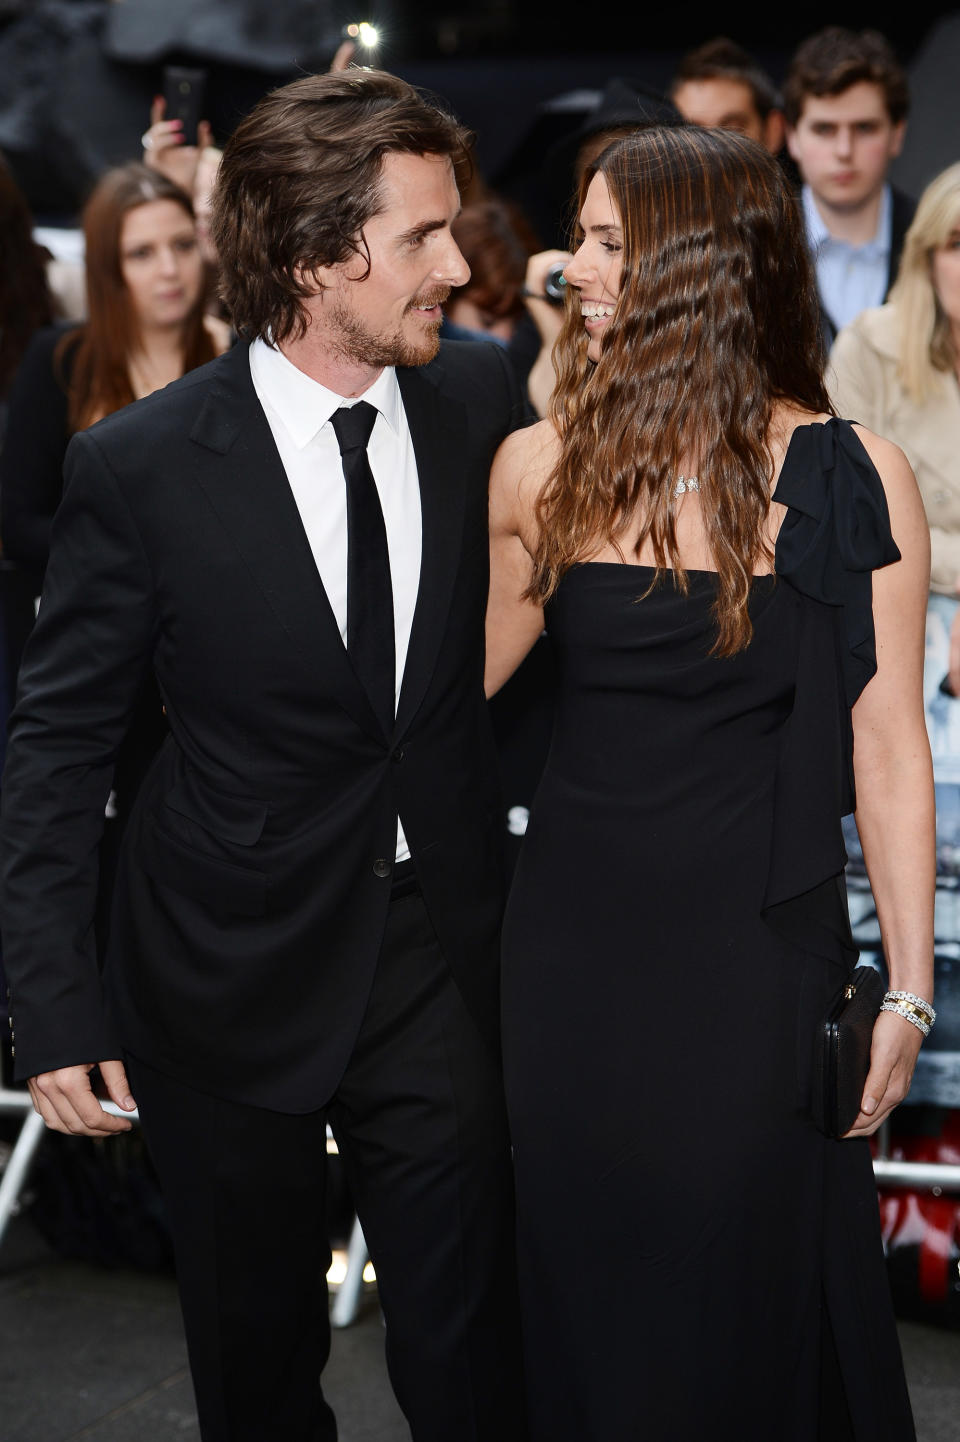 LONDON, ENGLAND - JULY 18: Actor Christian Bale and wife Sandra Bale attend European premiere of "The Dark Knight Rises" at Odeon Leicester Square on July 18, 2012 in London, England. (Photo by Ian Gavan/Getty Images)